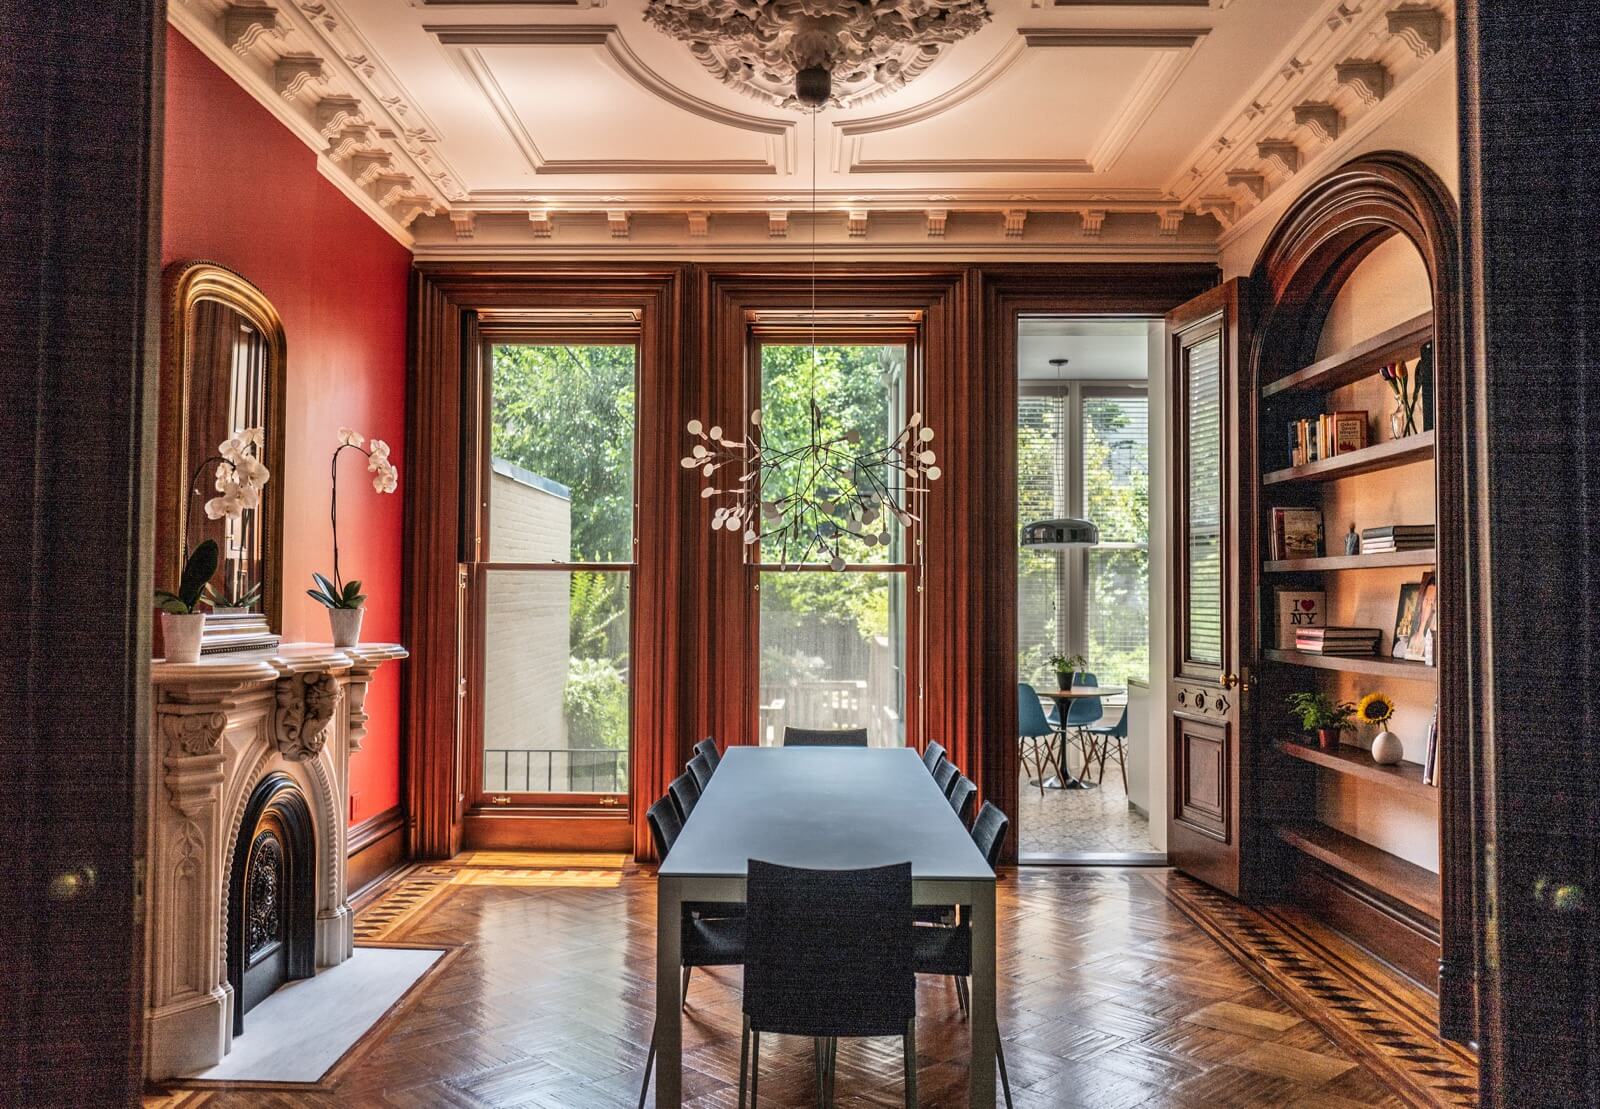 The Insider Prospect Heights Brownstone Restored Updated